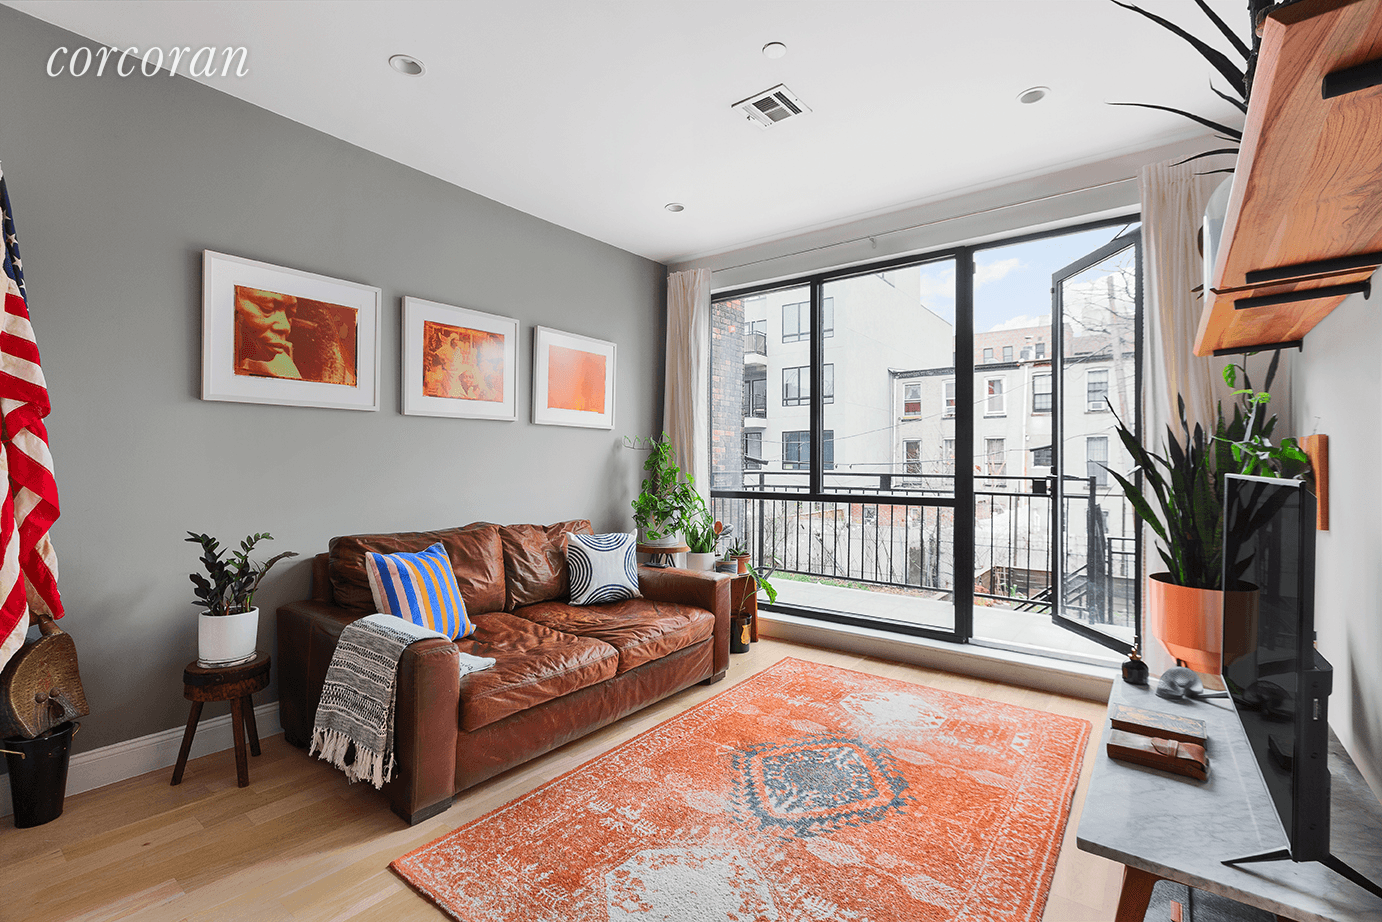 Brooklyn Oasis Overlooking Lush, Private Garden Situated in the heart of Bed Stuy, 223 Pulaski is a recently built, 8 unit boutique condo building.